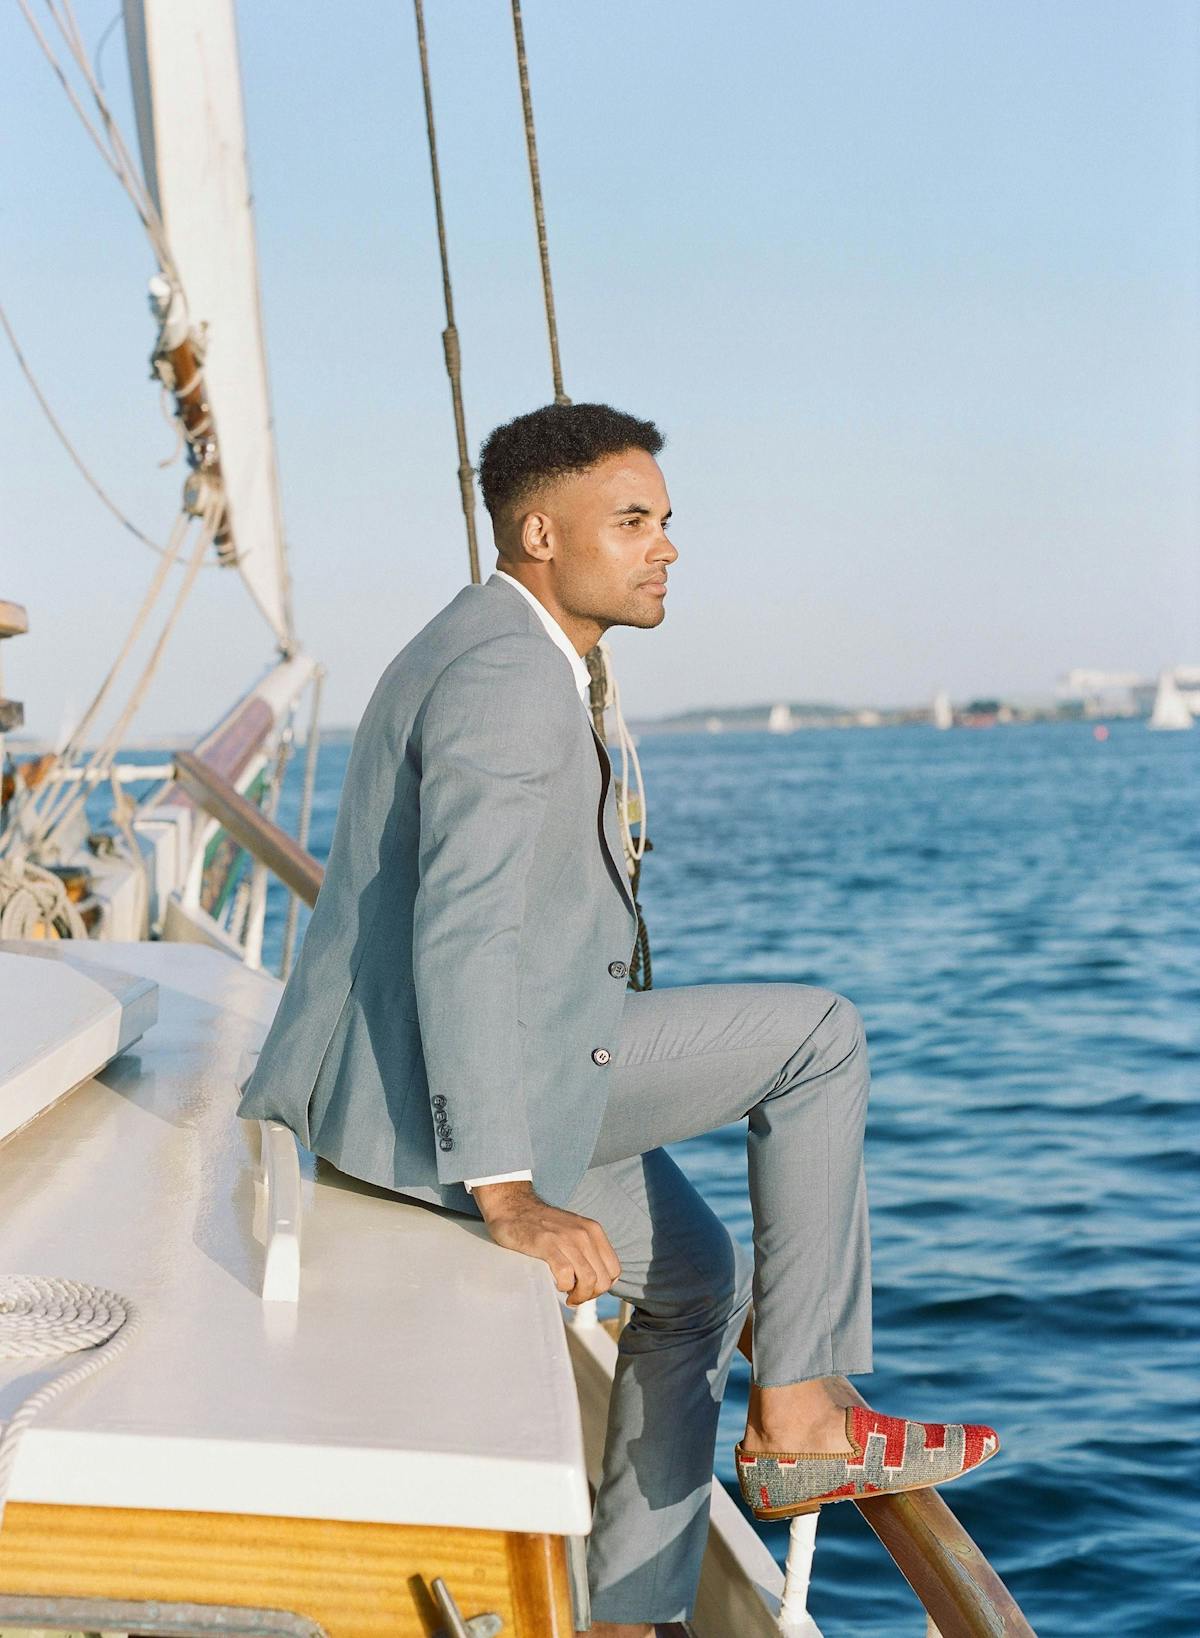 Light blue suit for wedding guest sitting on a boat wearing loafers